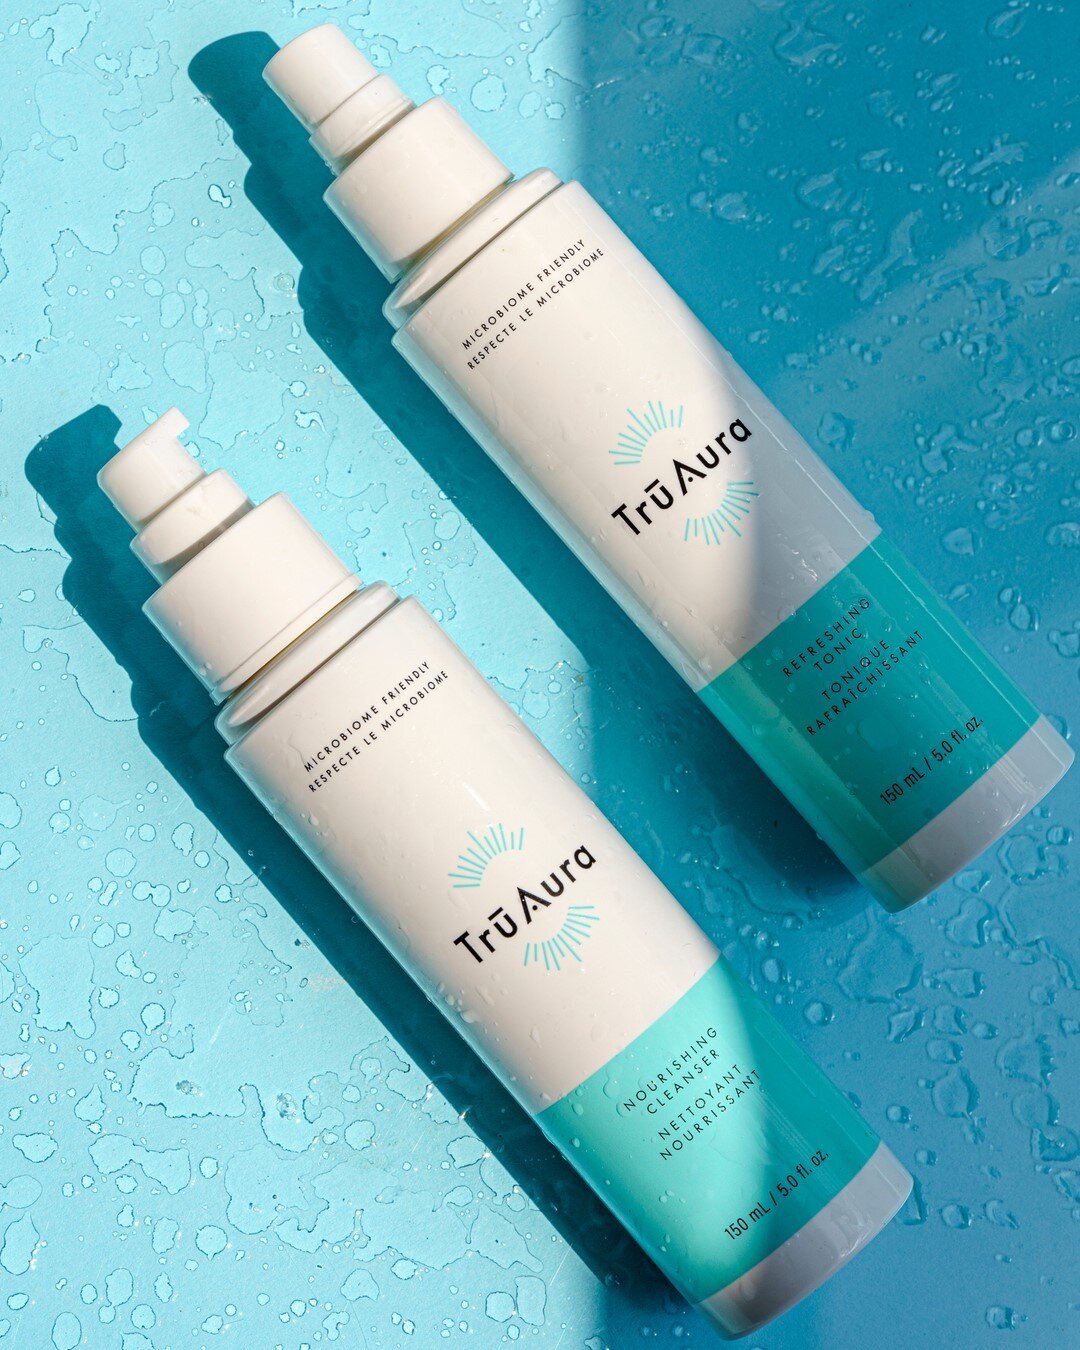 Do your plans for tomorrow start with #truaurabeauty ?⠀⠀⠀⠀⠀⠀⠀⠀⠀
.⠀⠀⠀⠀⠀⠀⠀⠀⠀
.⠀⠀⠀⠀⠀⠀⠀⠀⠀
.⠀⠀⠀⠀⠀⠀⠀⠀⠀
.⠀⠀⠀⠀⠀⠀⠀⠀⠀
 #hydration #clearskin #youthfulskin #skincareessentials #truaurabeauty #skincareproducts #skincarejunkie #love #skincareessentials #skincareg